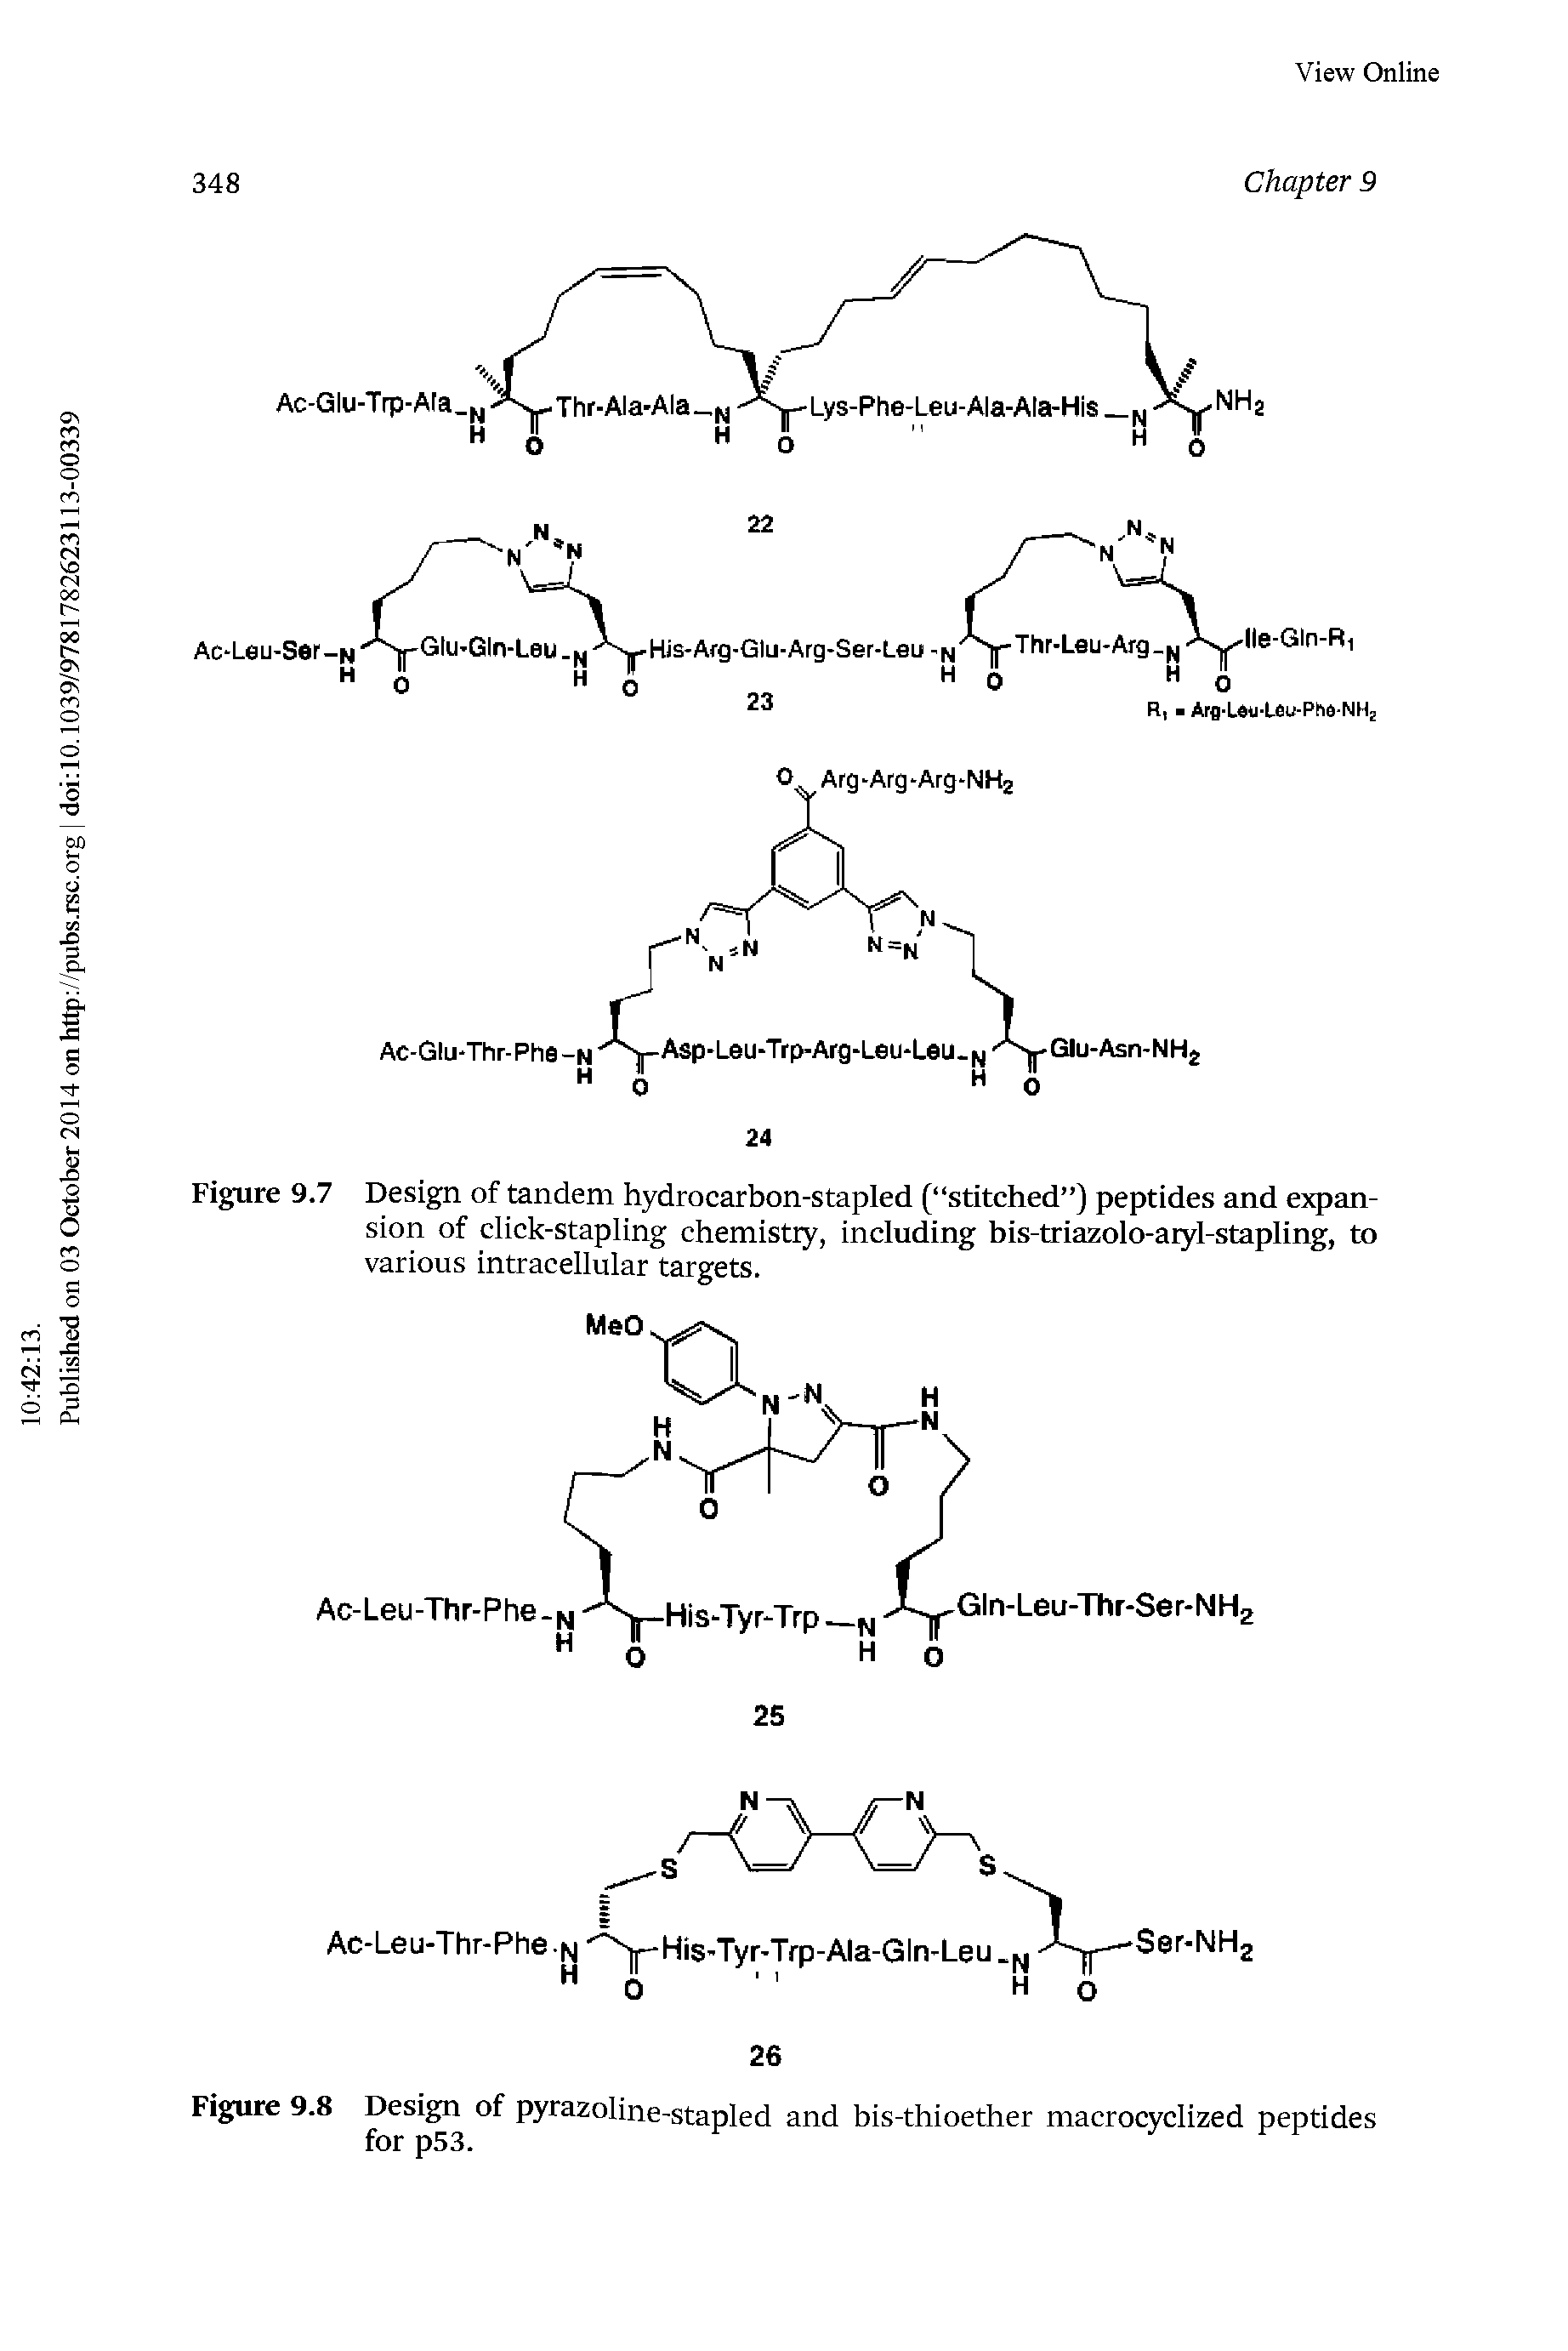 Figure 9.7 Design of tandem hydrocarbon-stapled ( stitched ) peptides and expansion of click-stapling chemistry, including bis-triazolo-aiyl-stapling, to various intracellular targets.